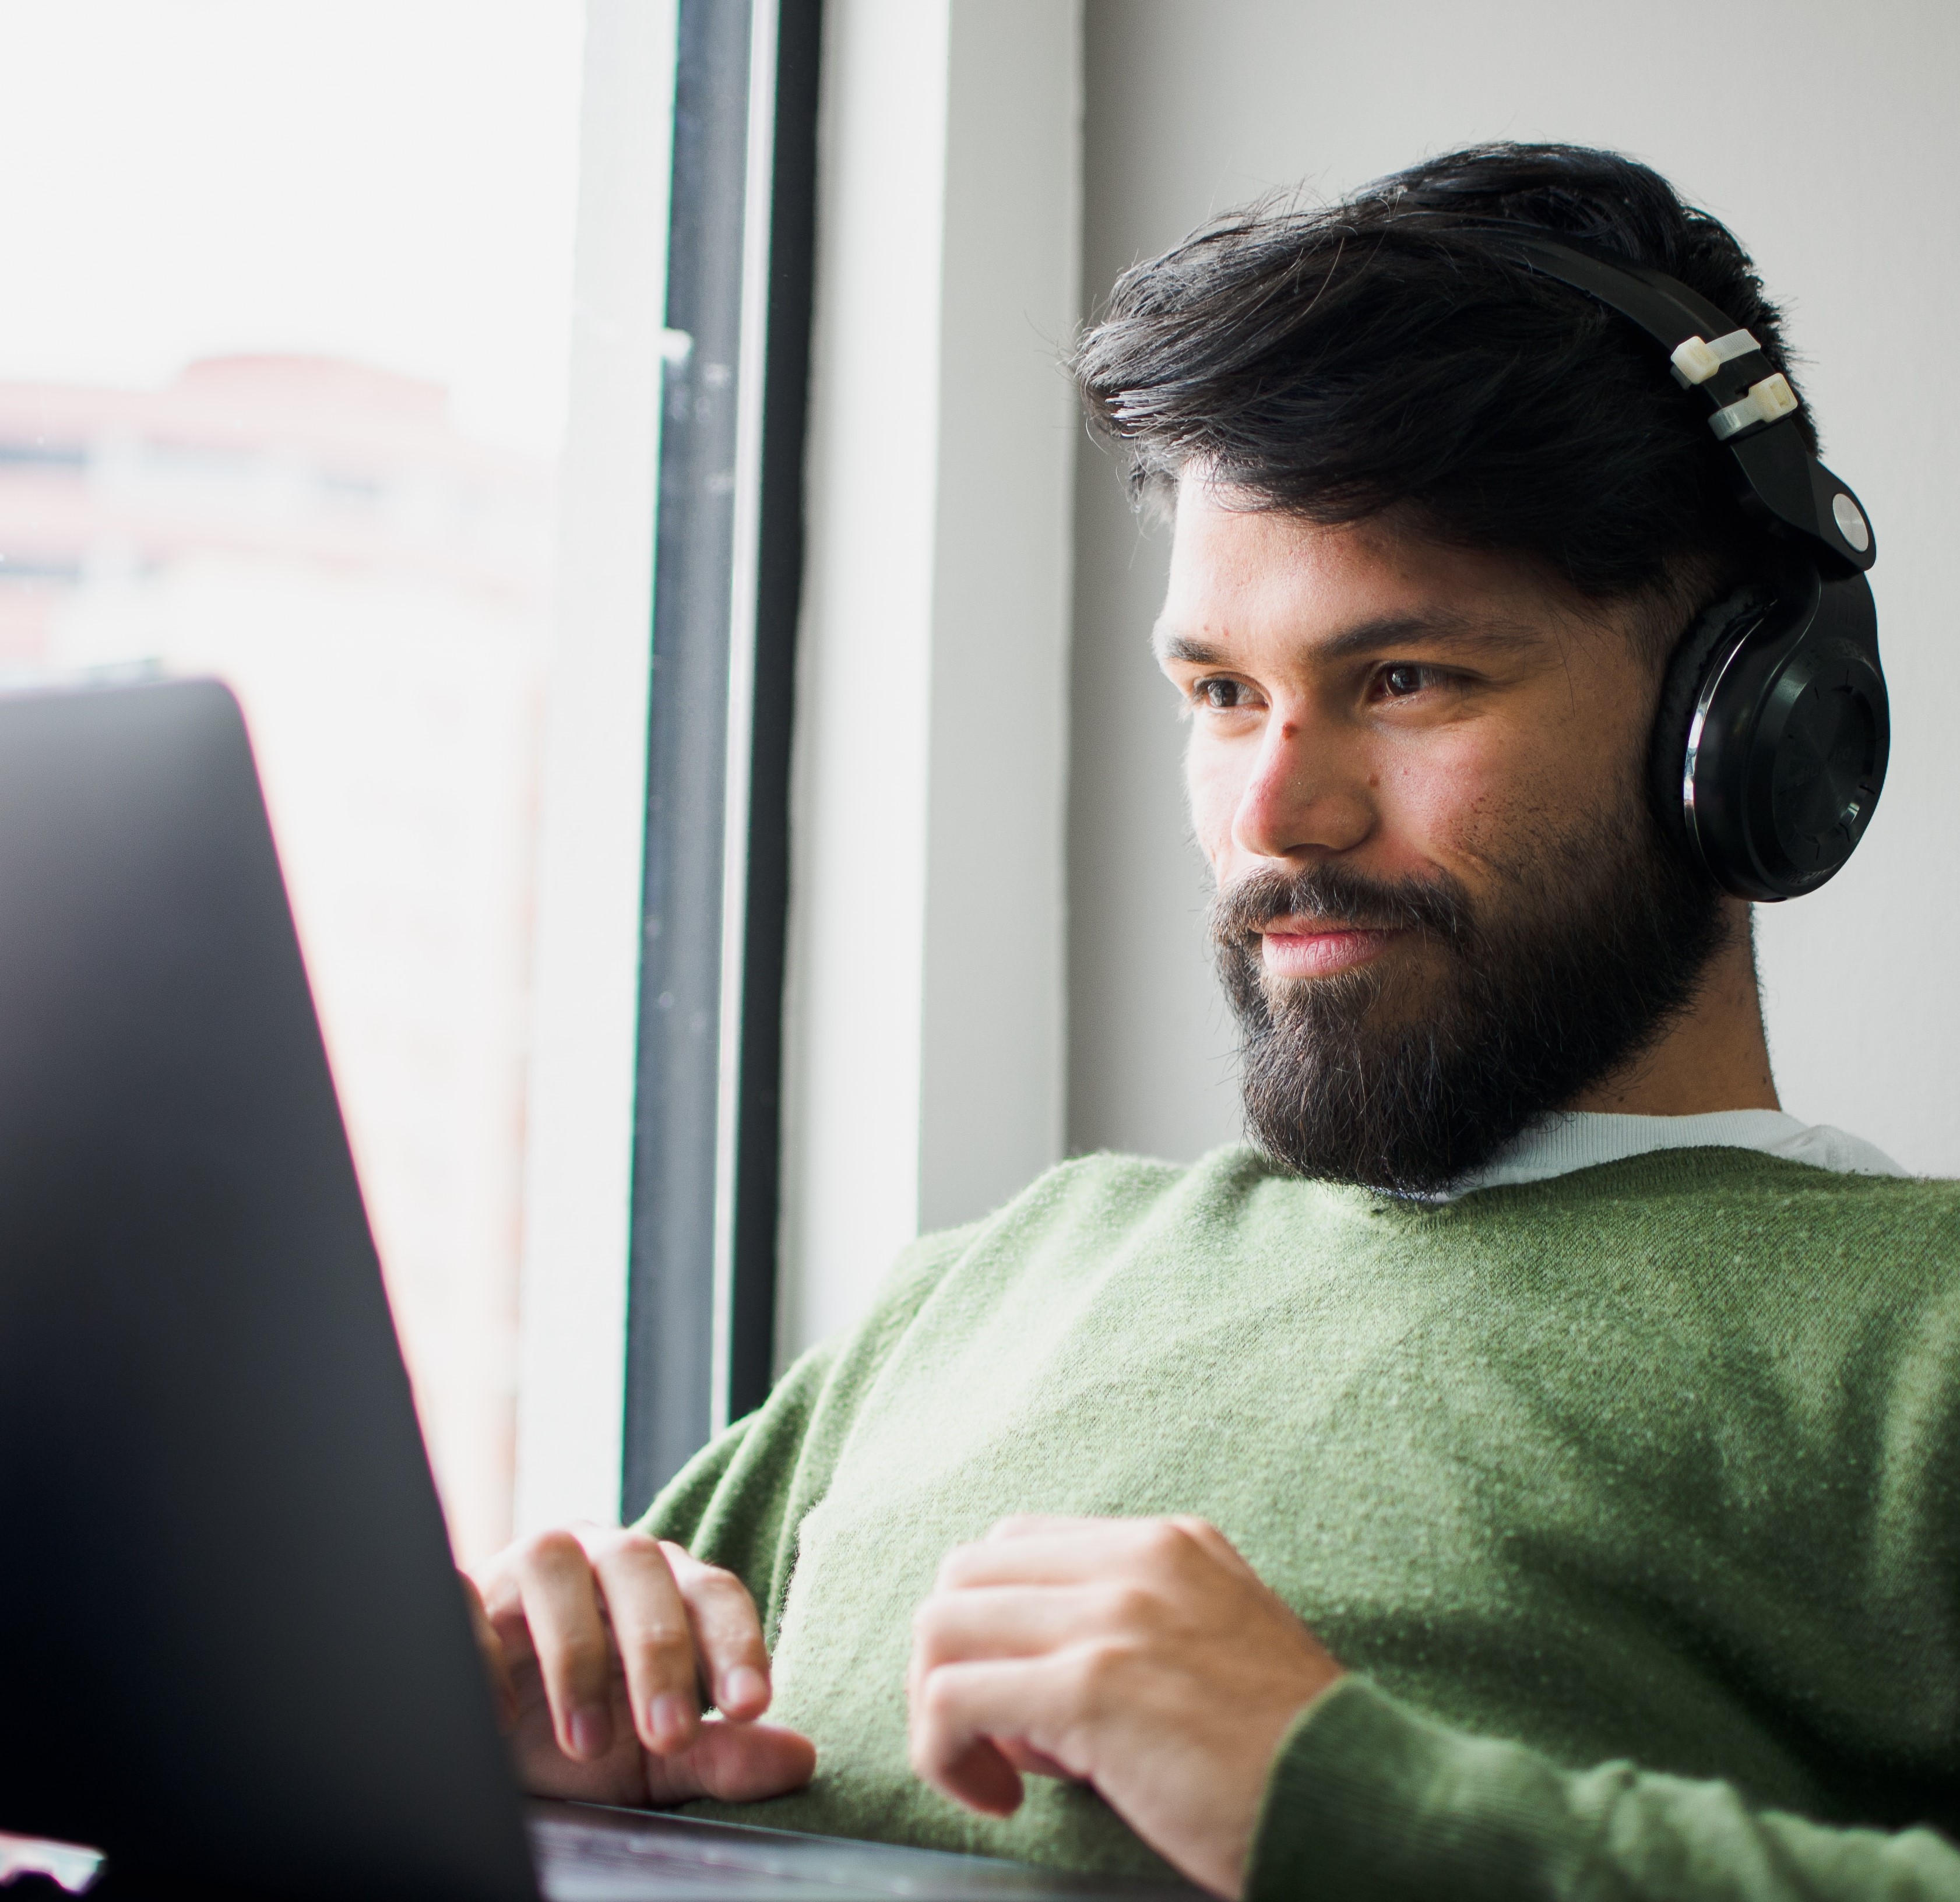 Youngish person sitting at laptop wearing headphones and smiling